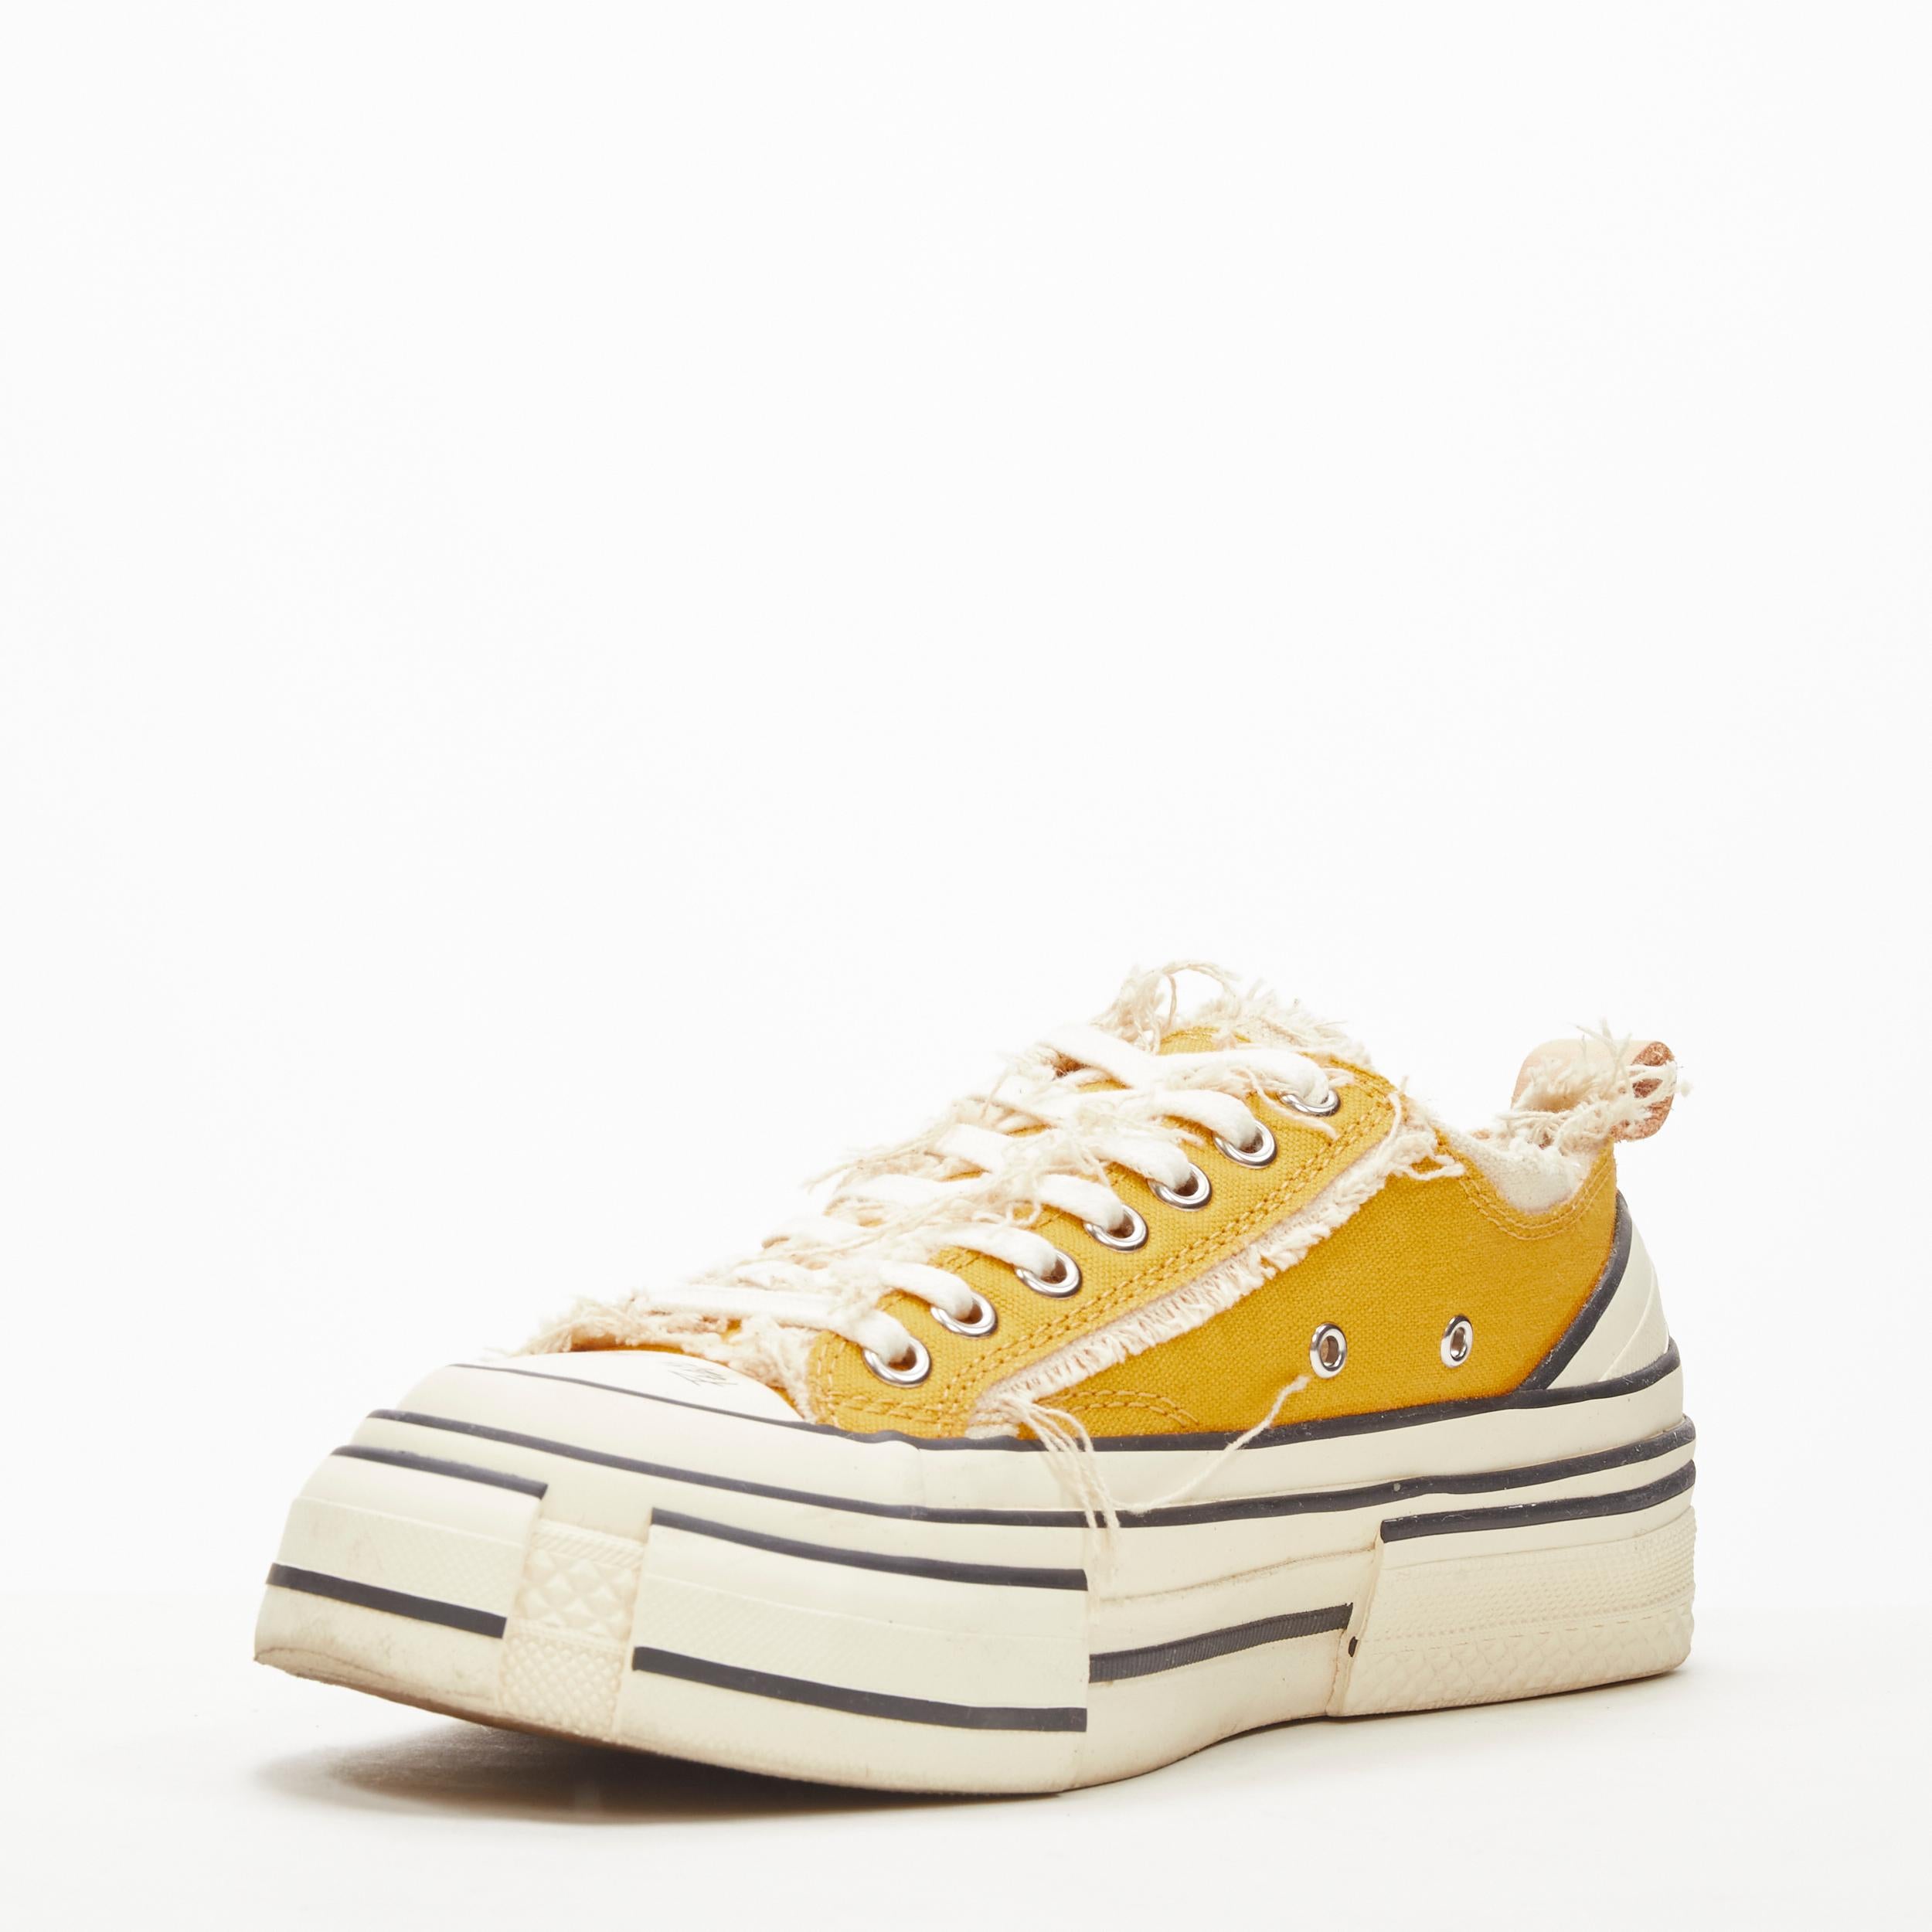 White XVESSEL G.O.P. Lows yellow deconstructed distressed sneakers EU37 US7 For Sale